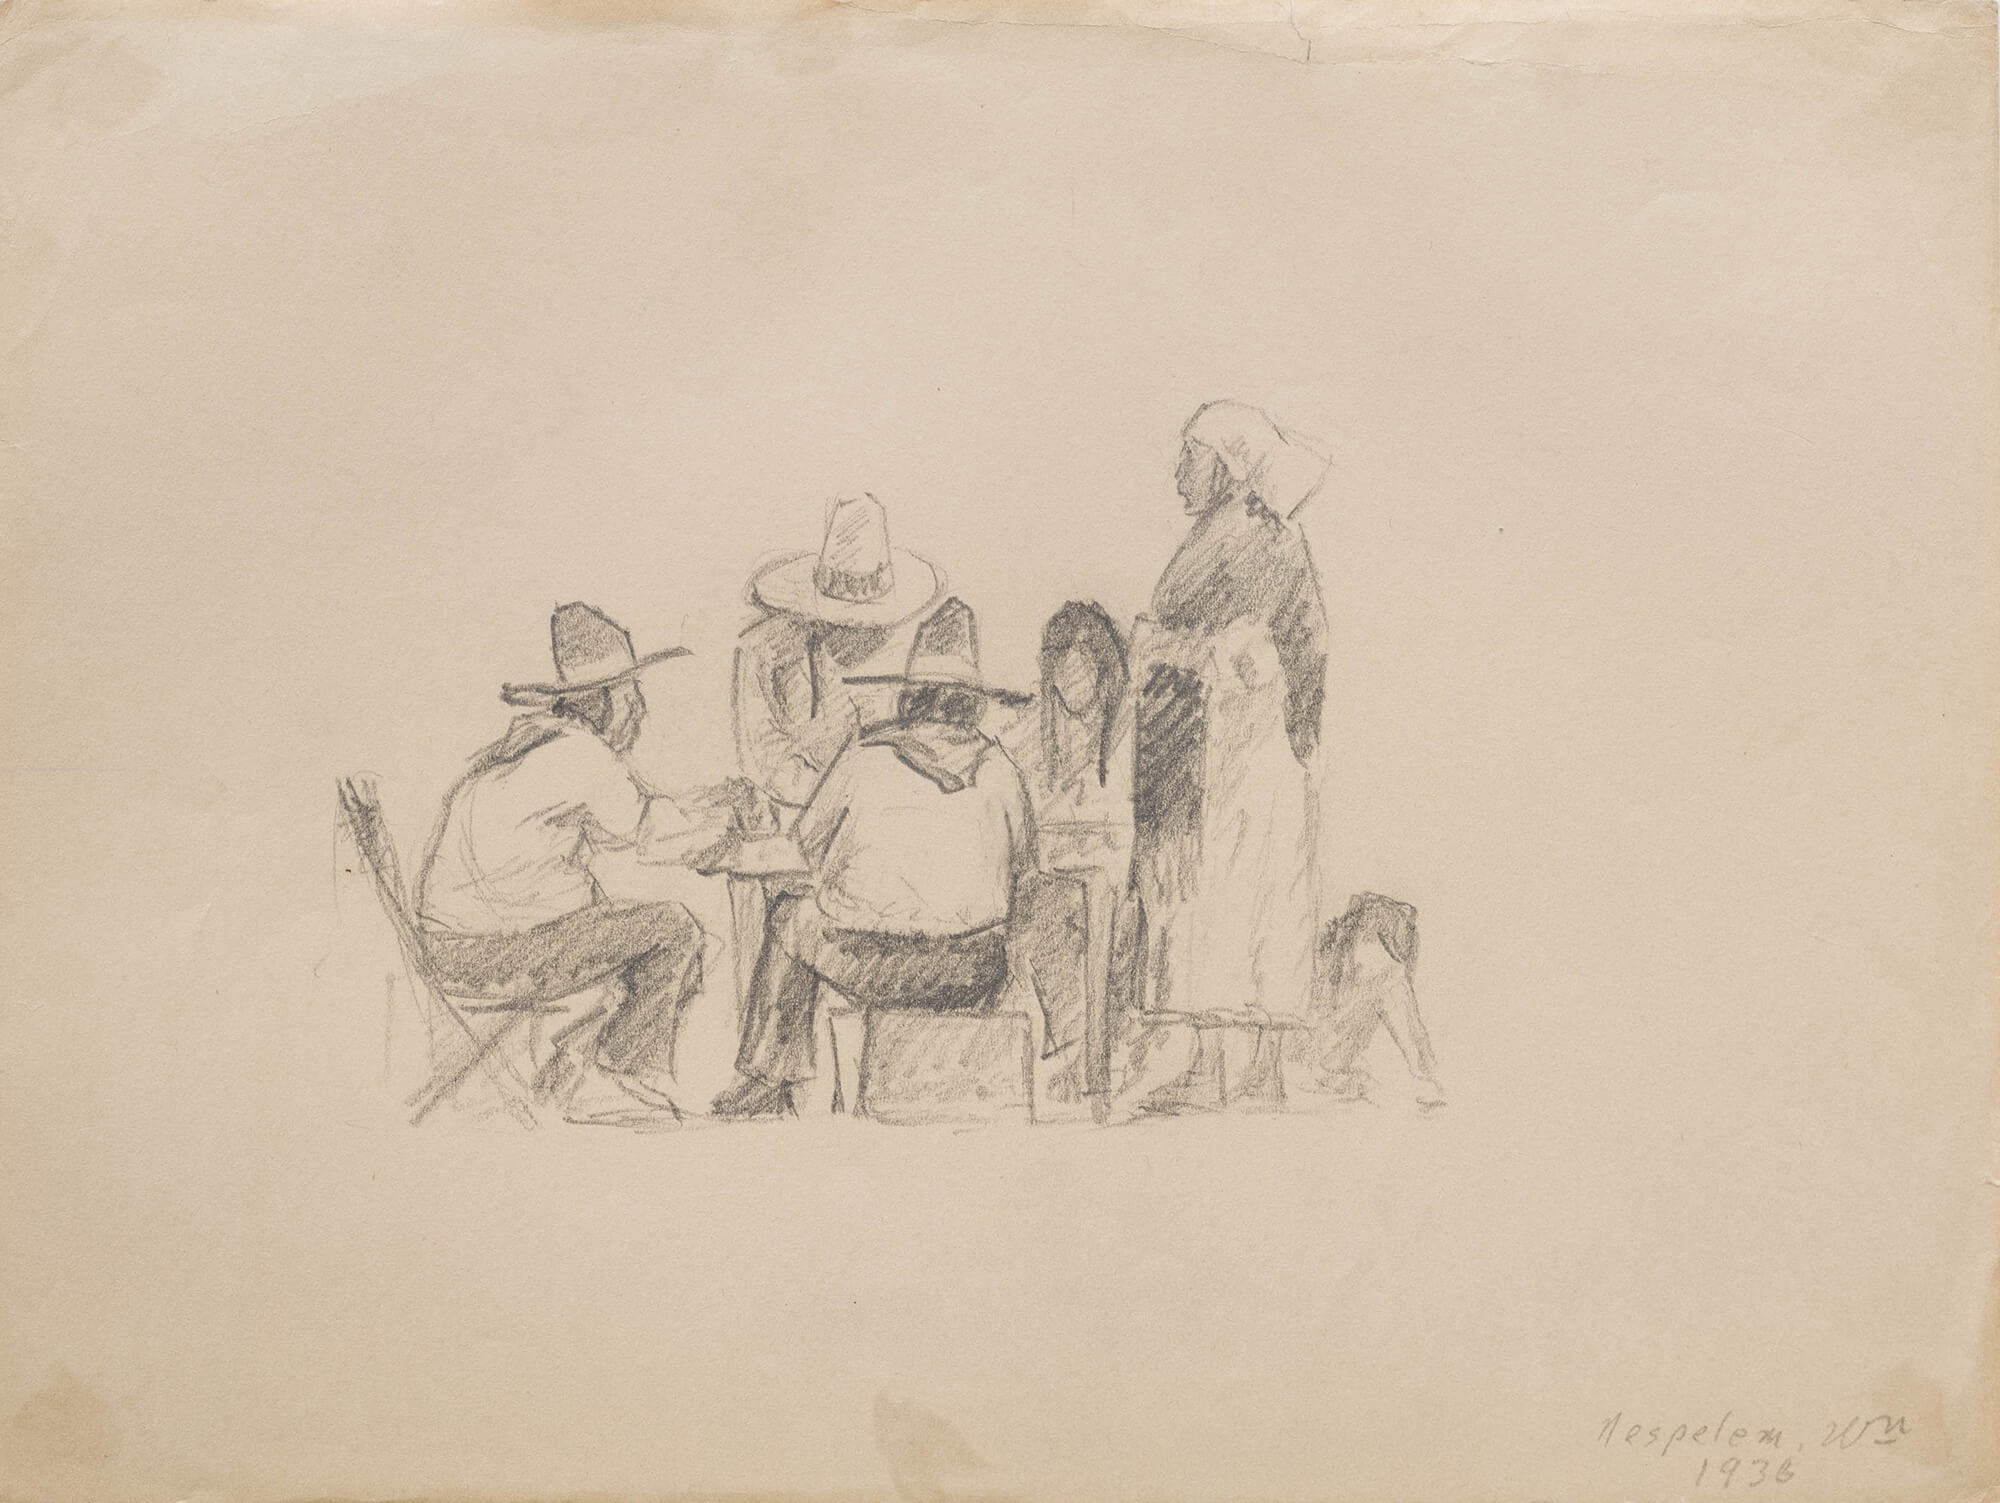 Graphite sketch on paper of people gathered around a table